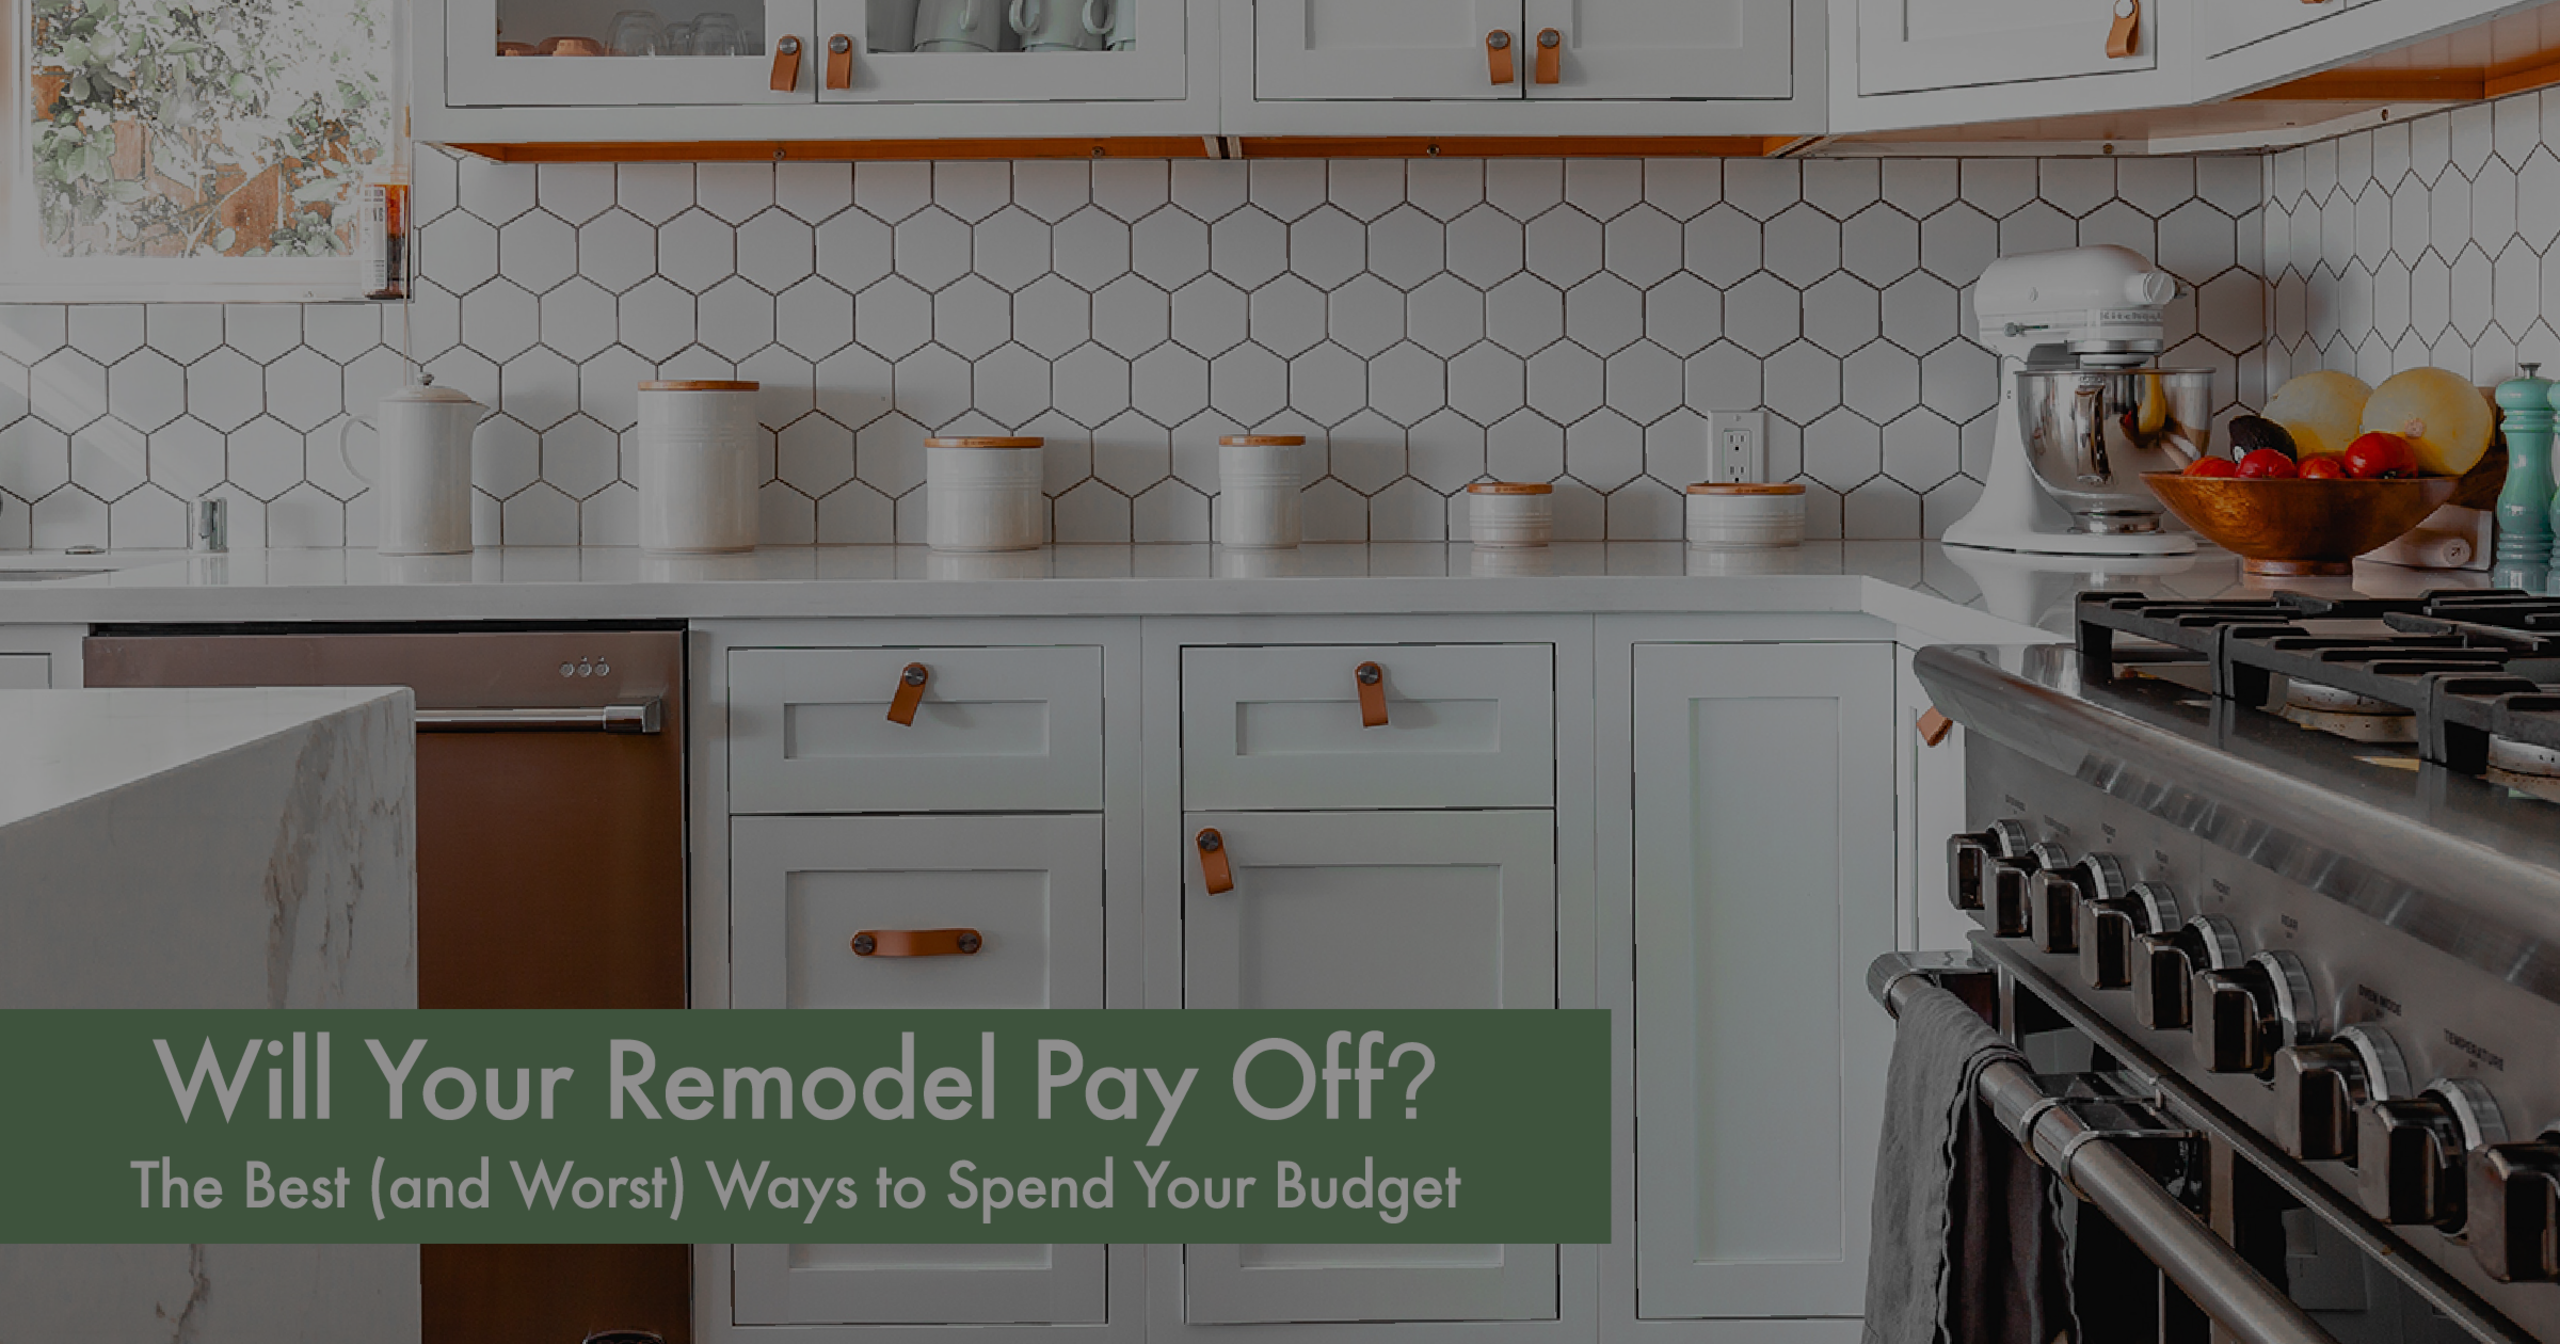 Will Your Remodel Pay Off? The Best (and Worst) Ways to Spend Your Budget